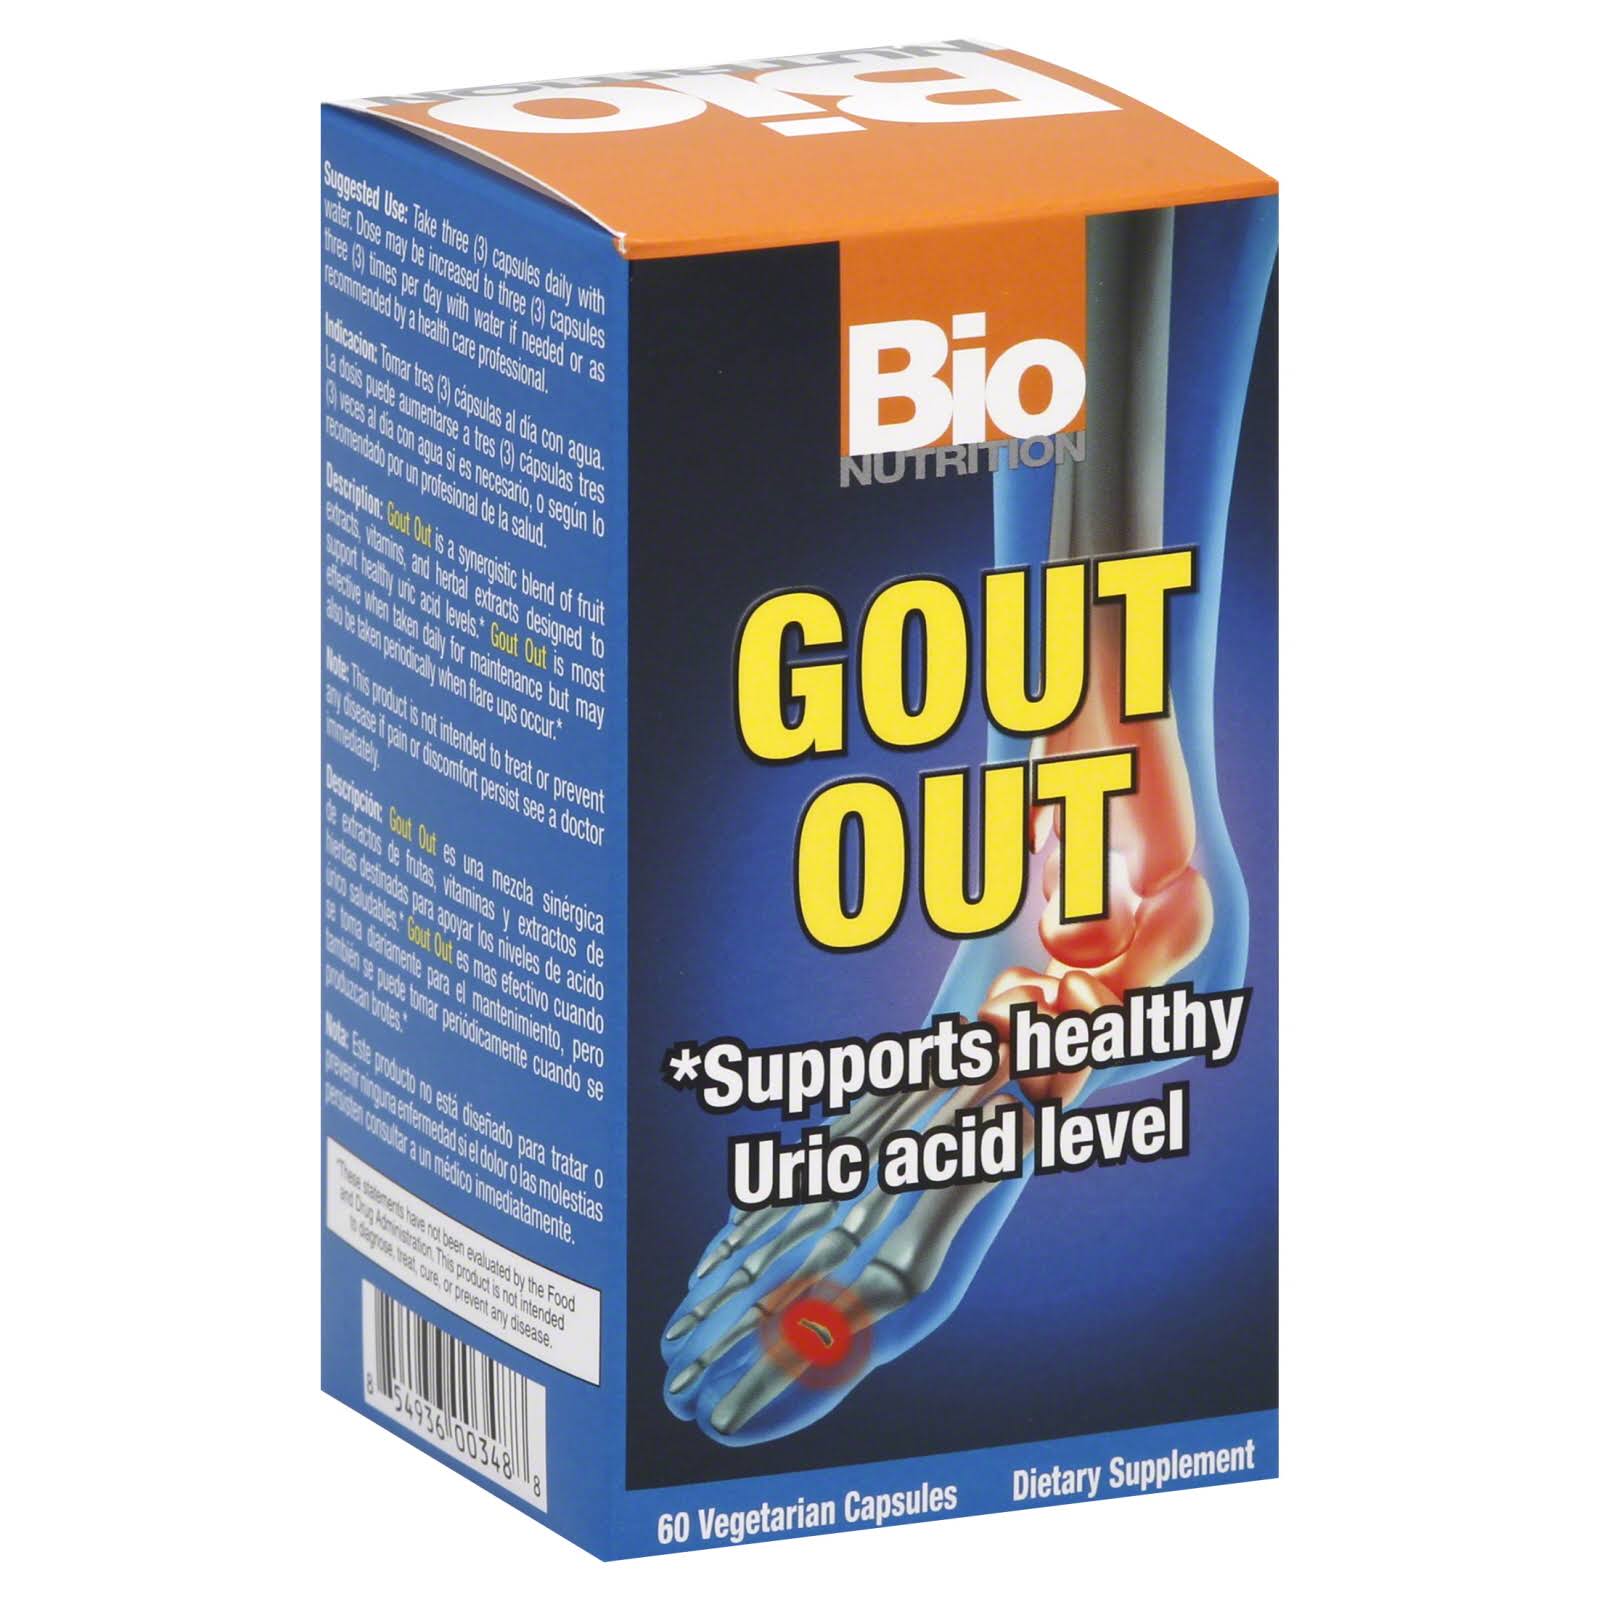 Bio Nutrition - Gout Out - 60 Vegetarian Capsules